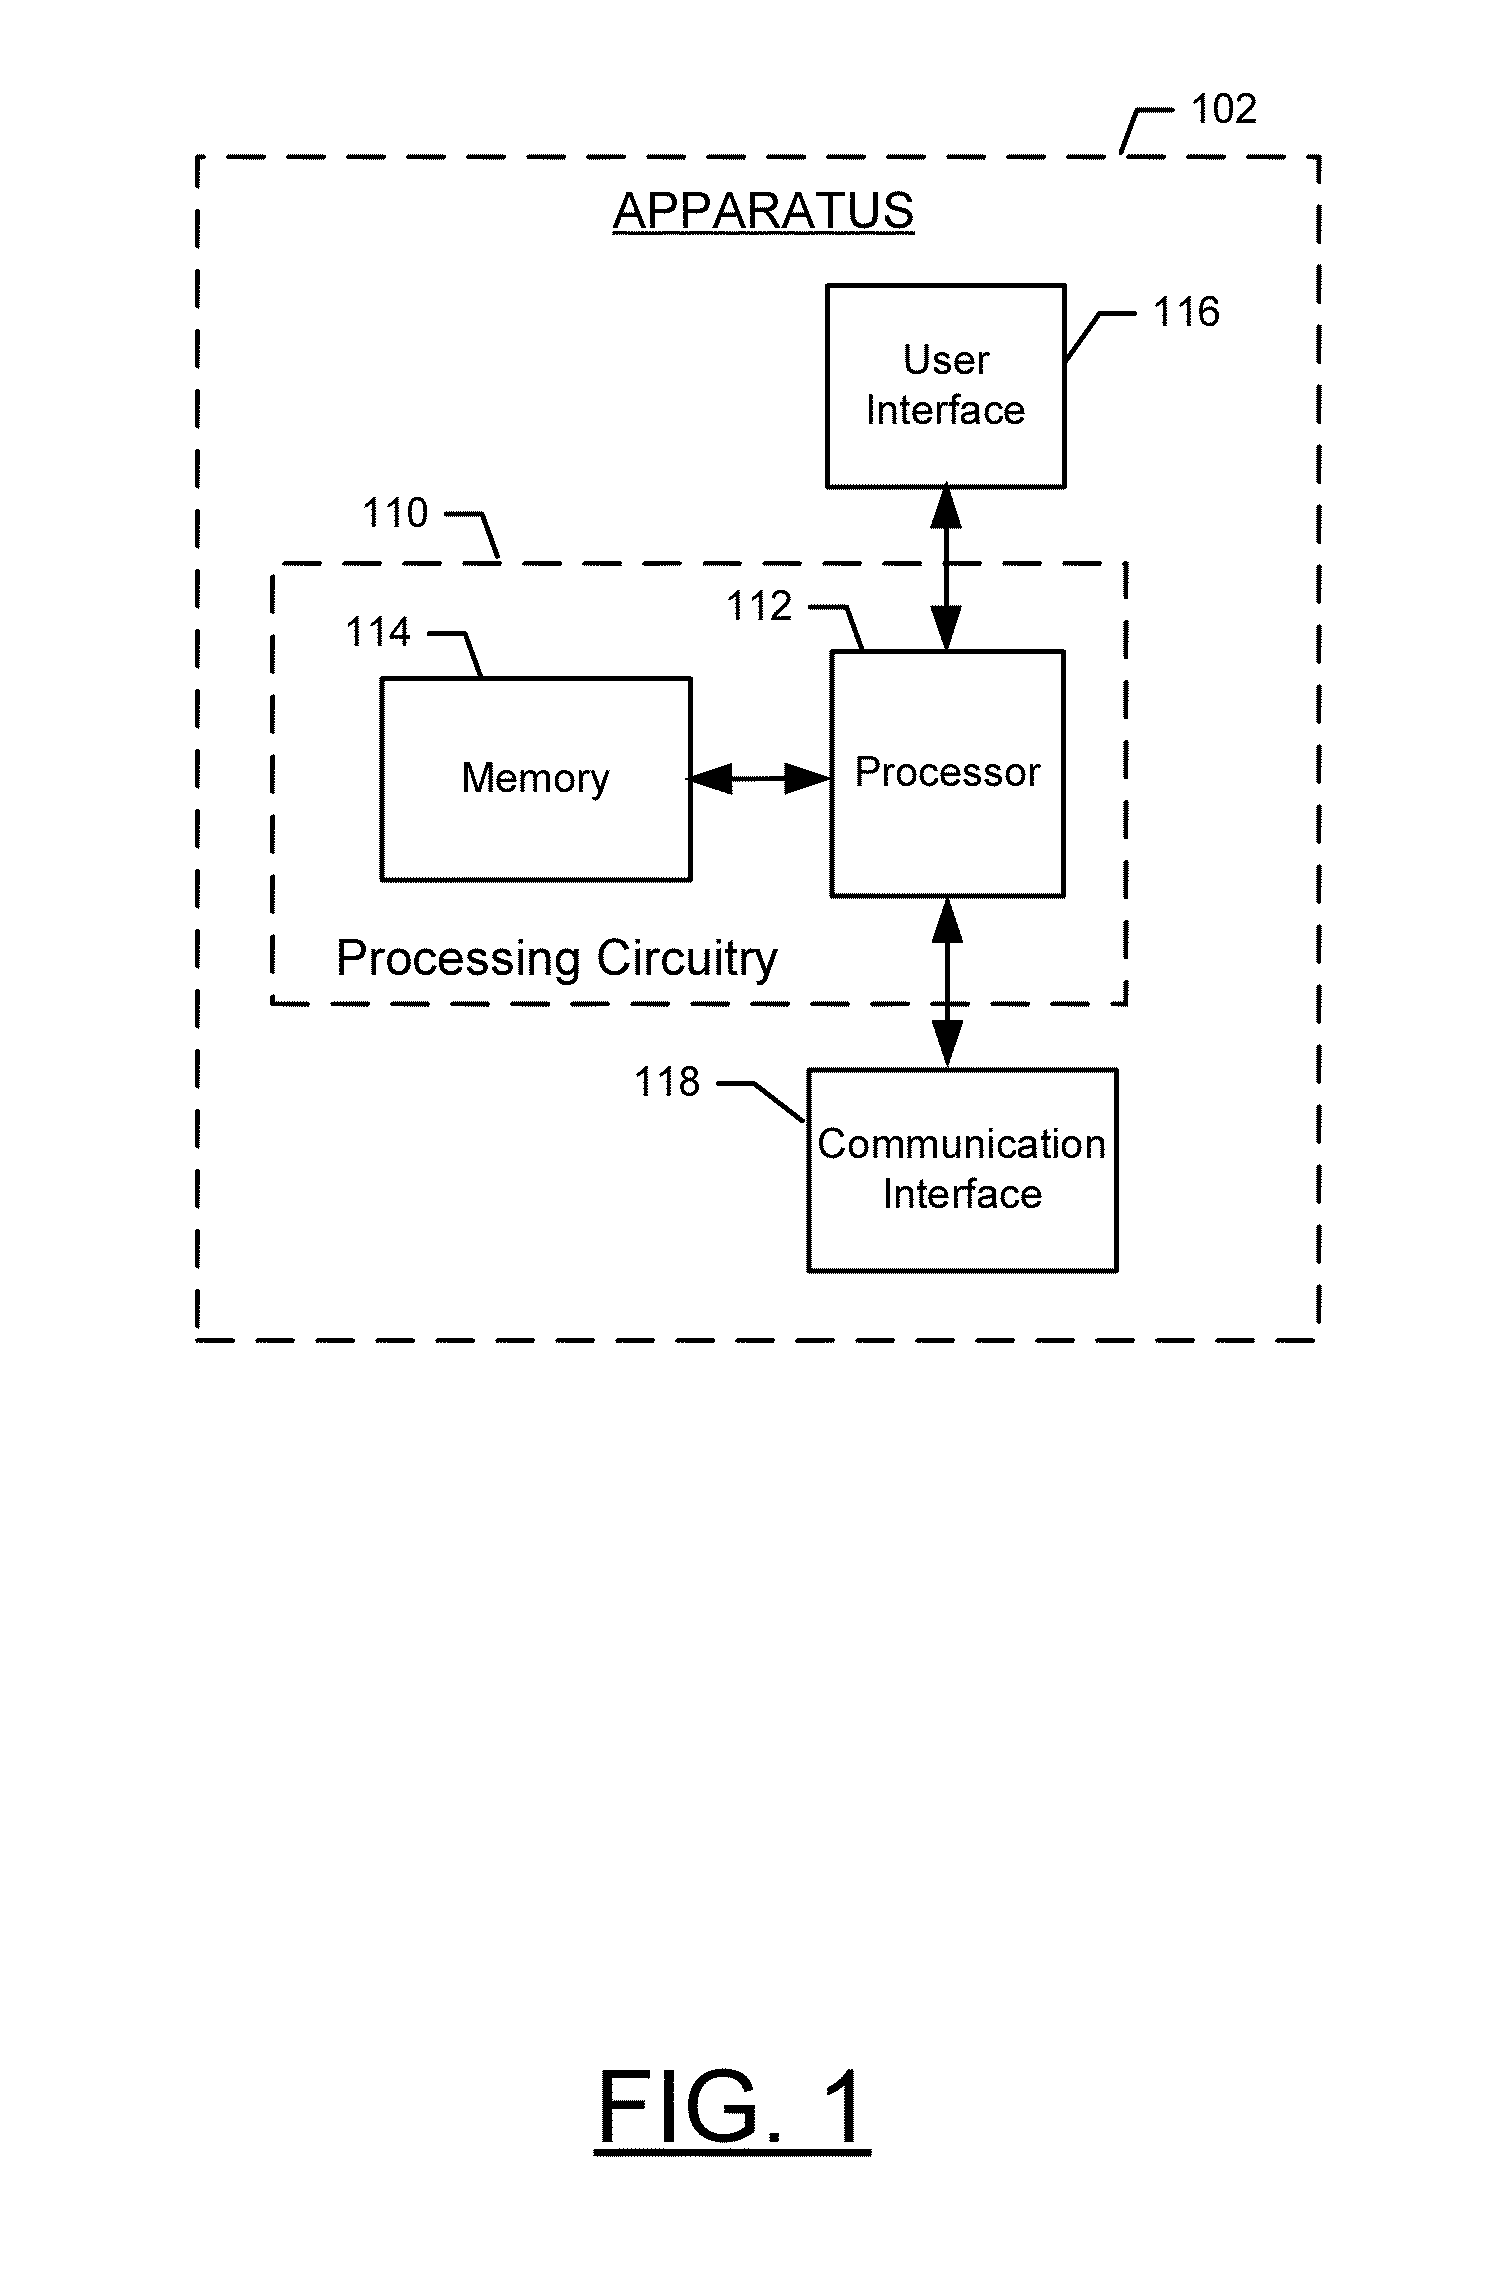 Method and apparatus for delaying propagation of patient healthcare data